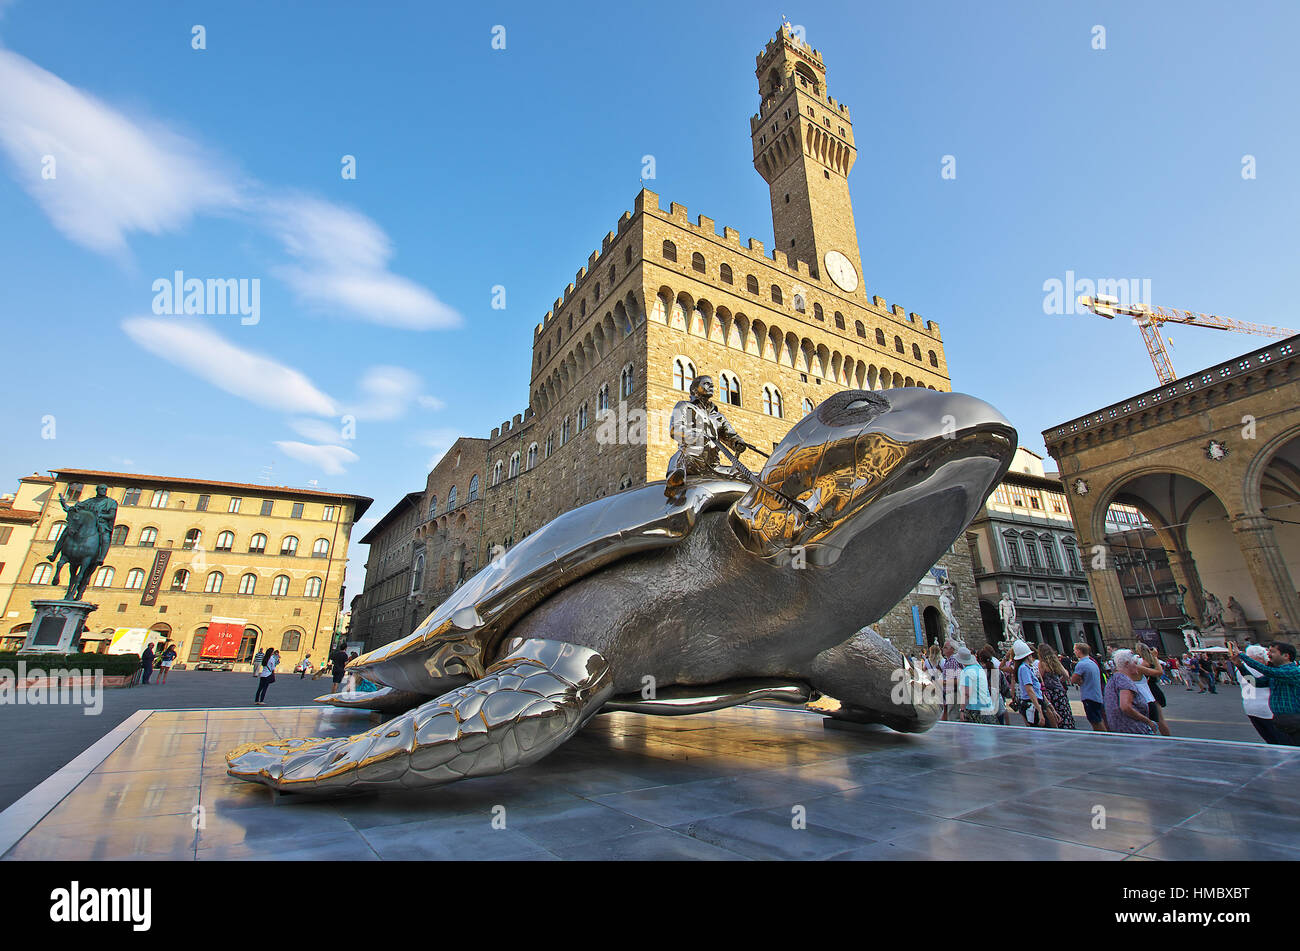 FLORENCE,IT - SEPTEMBER,9 2016 - Bronze statue of a giant turtle, by belgian artist Jan Fabre, in Signoria square in Florence. Stock Photo